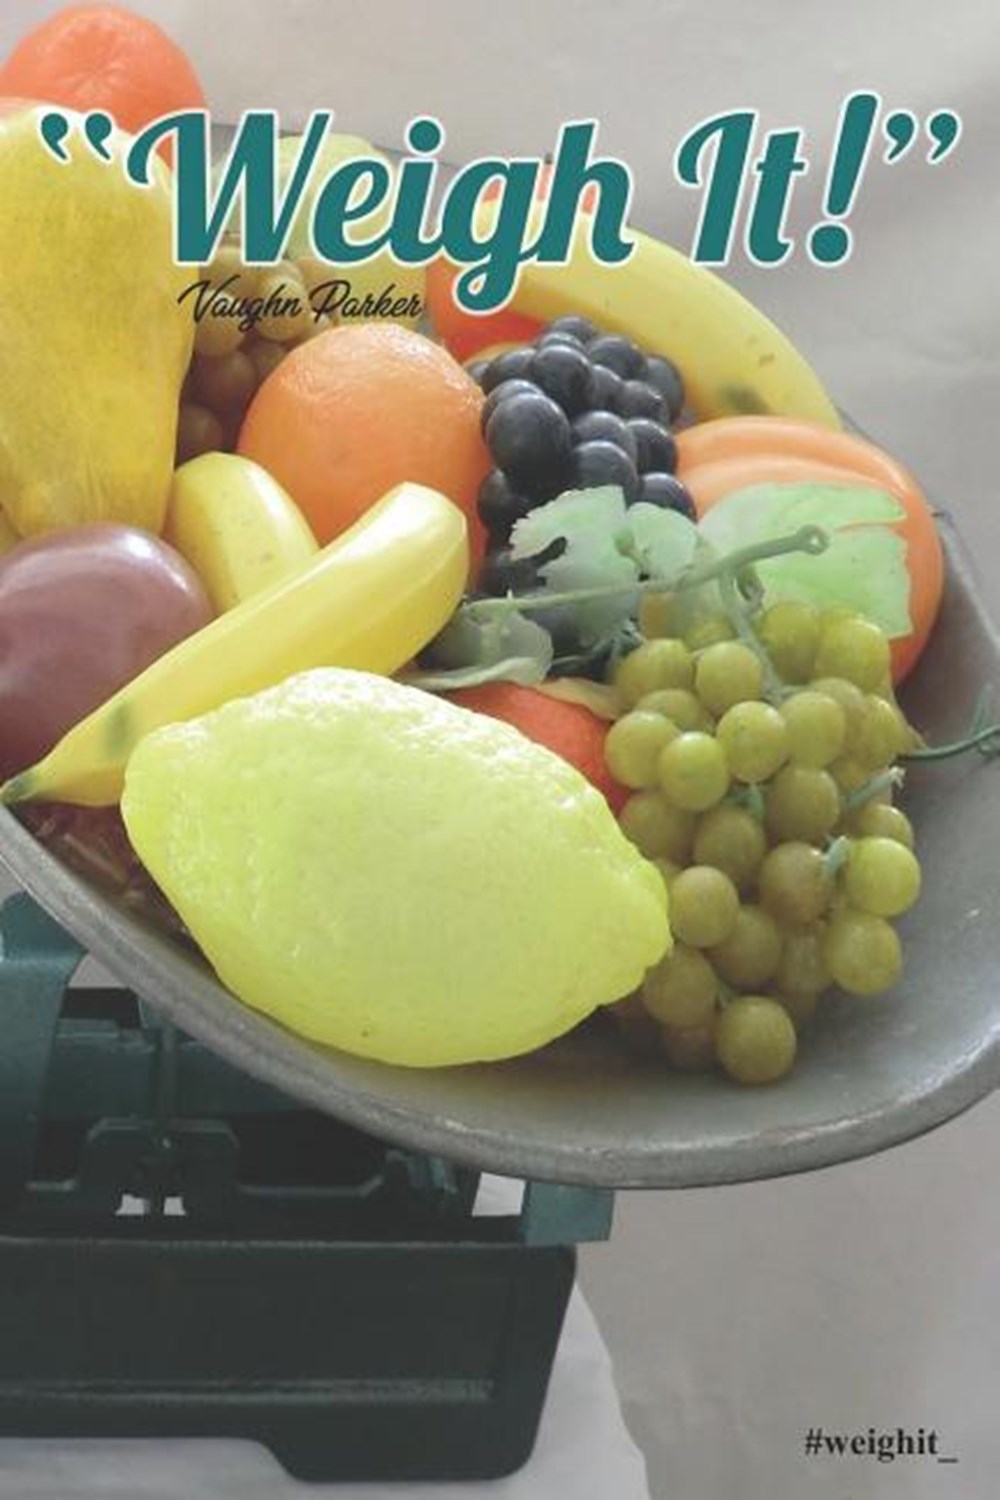 Weigh It An Exercise and Diet Journal To Assist You With Creating Your Own Healthy Living